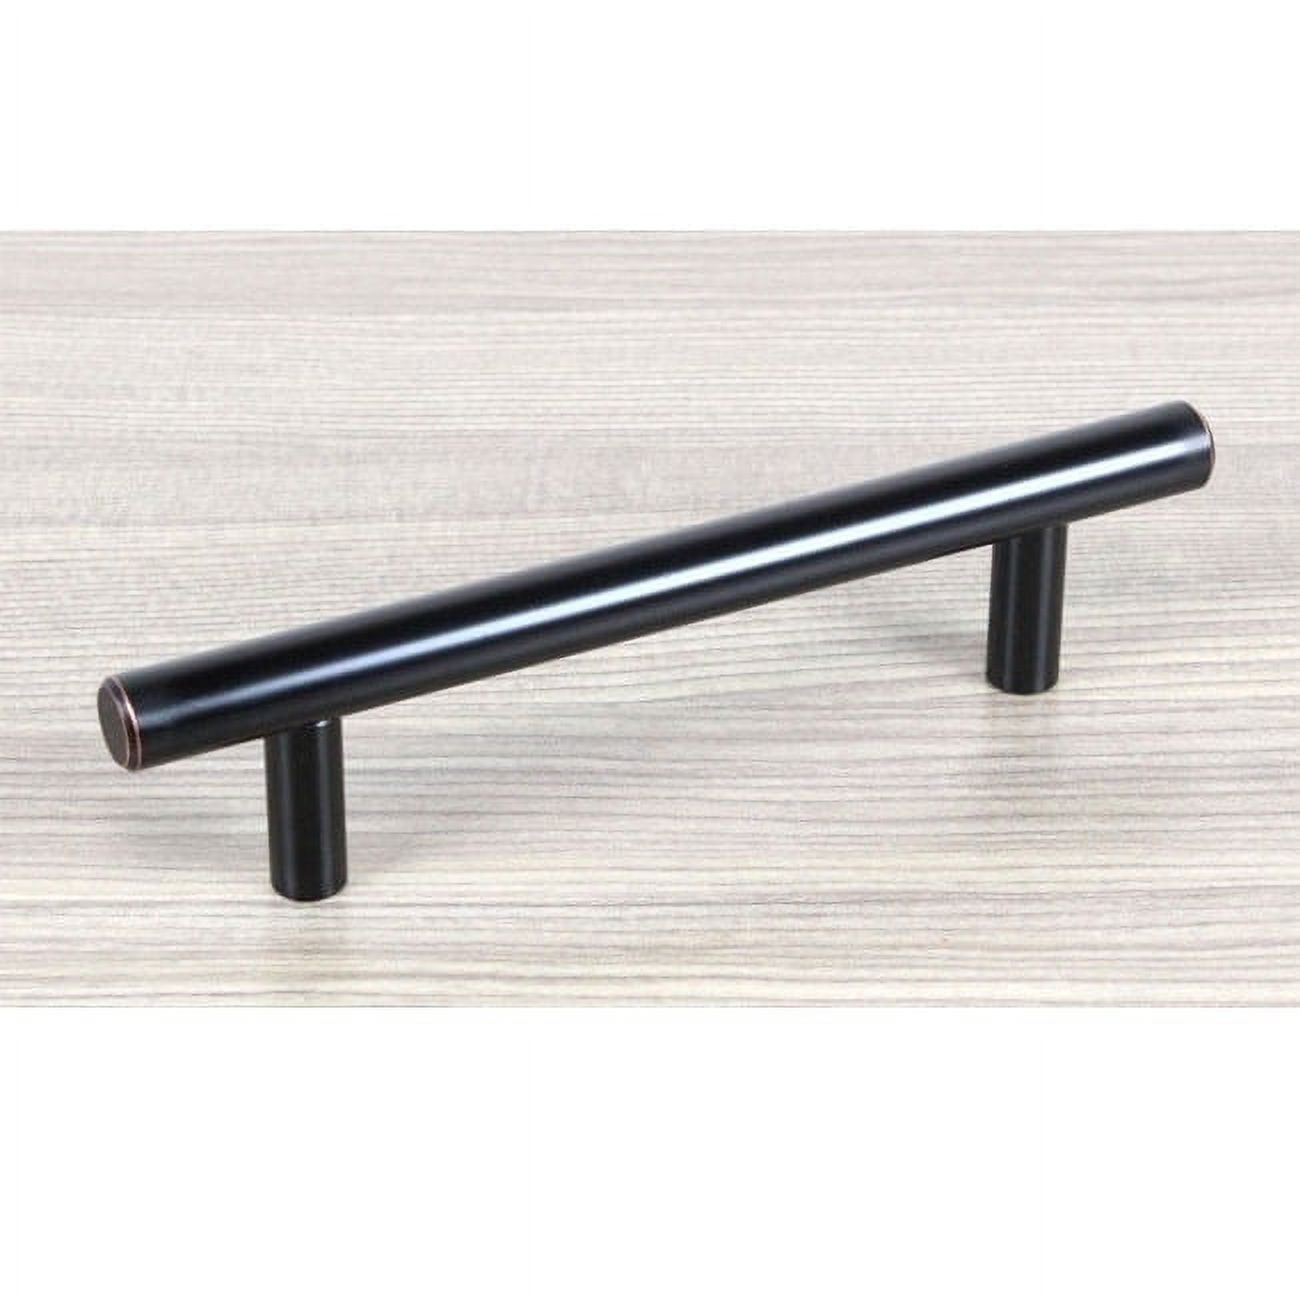 6" Solid Oil Rubbed Bronze Cabinet Bar Pull Handle 6-inch (150mm) Solid Oil Rubbed Bronze Cabinet Bar Pull Handles (Case of 5) - image 4 of 5